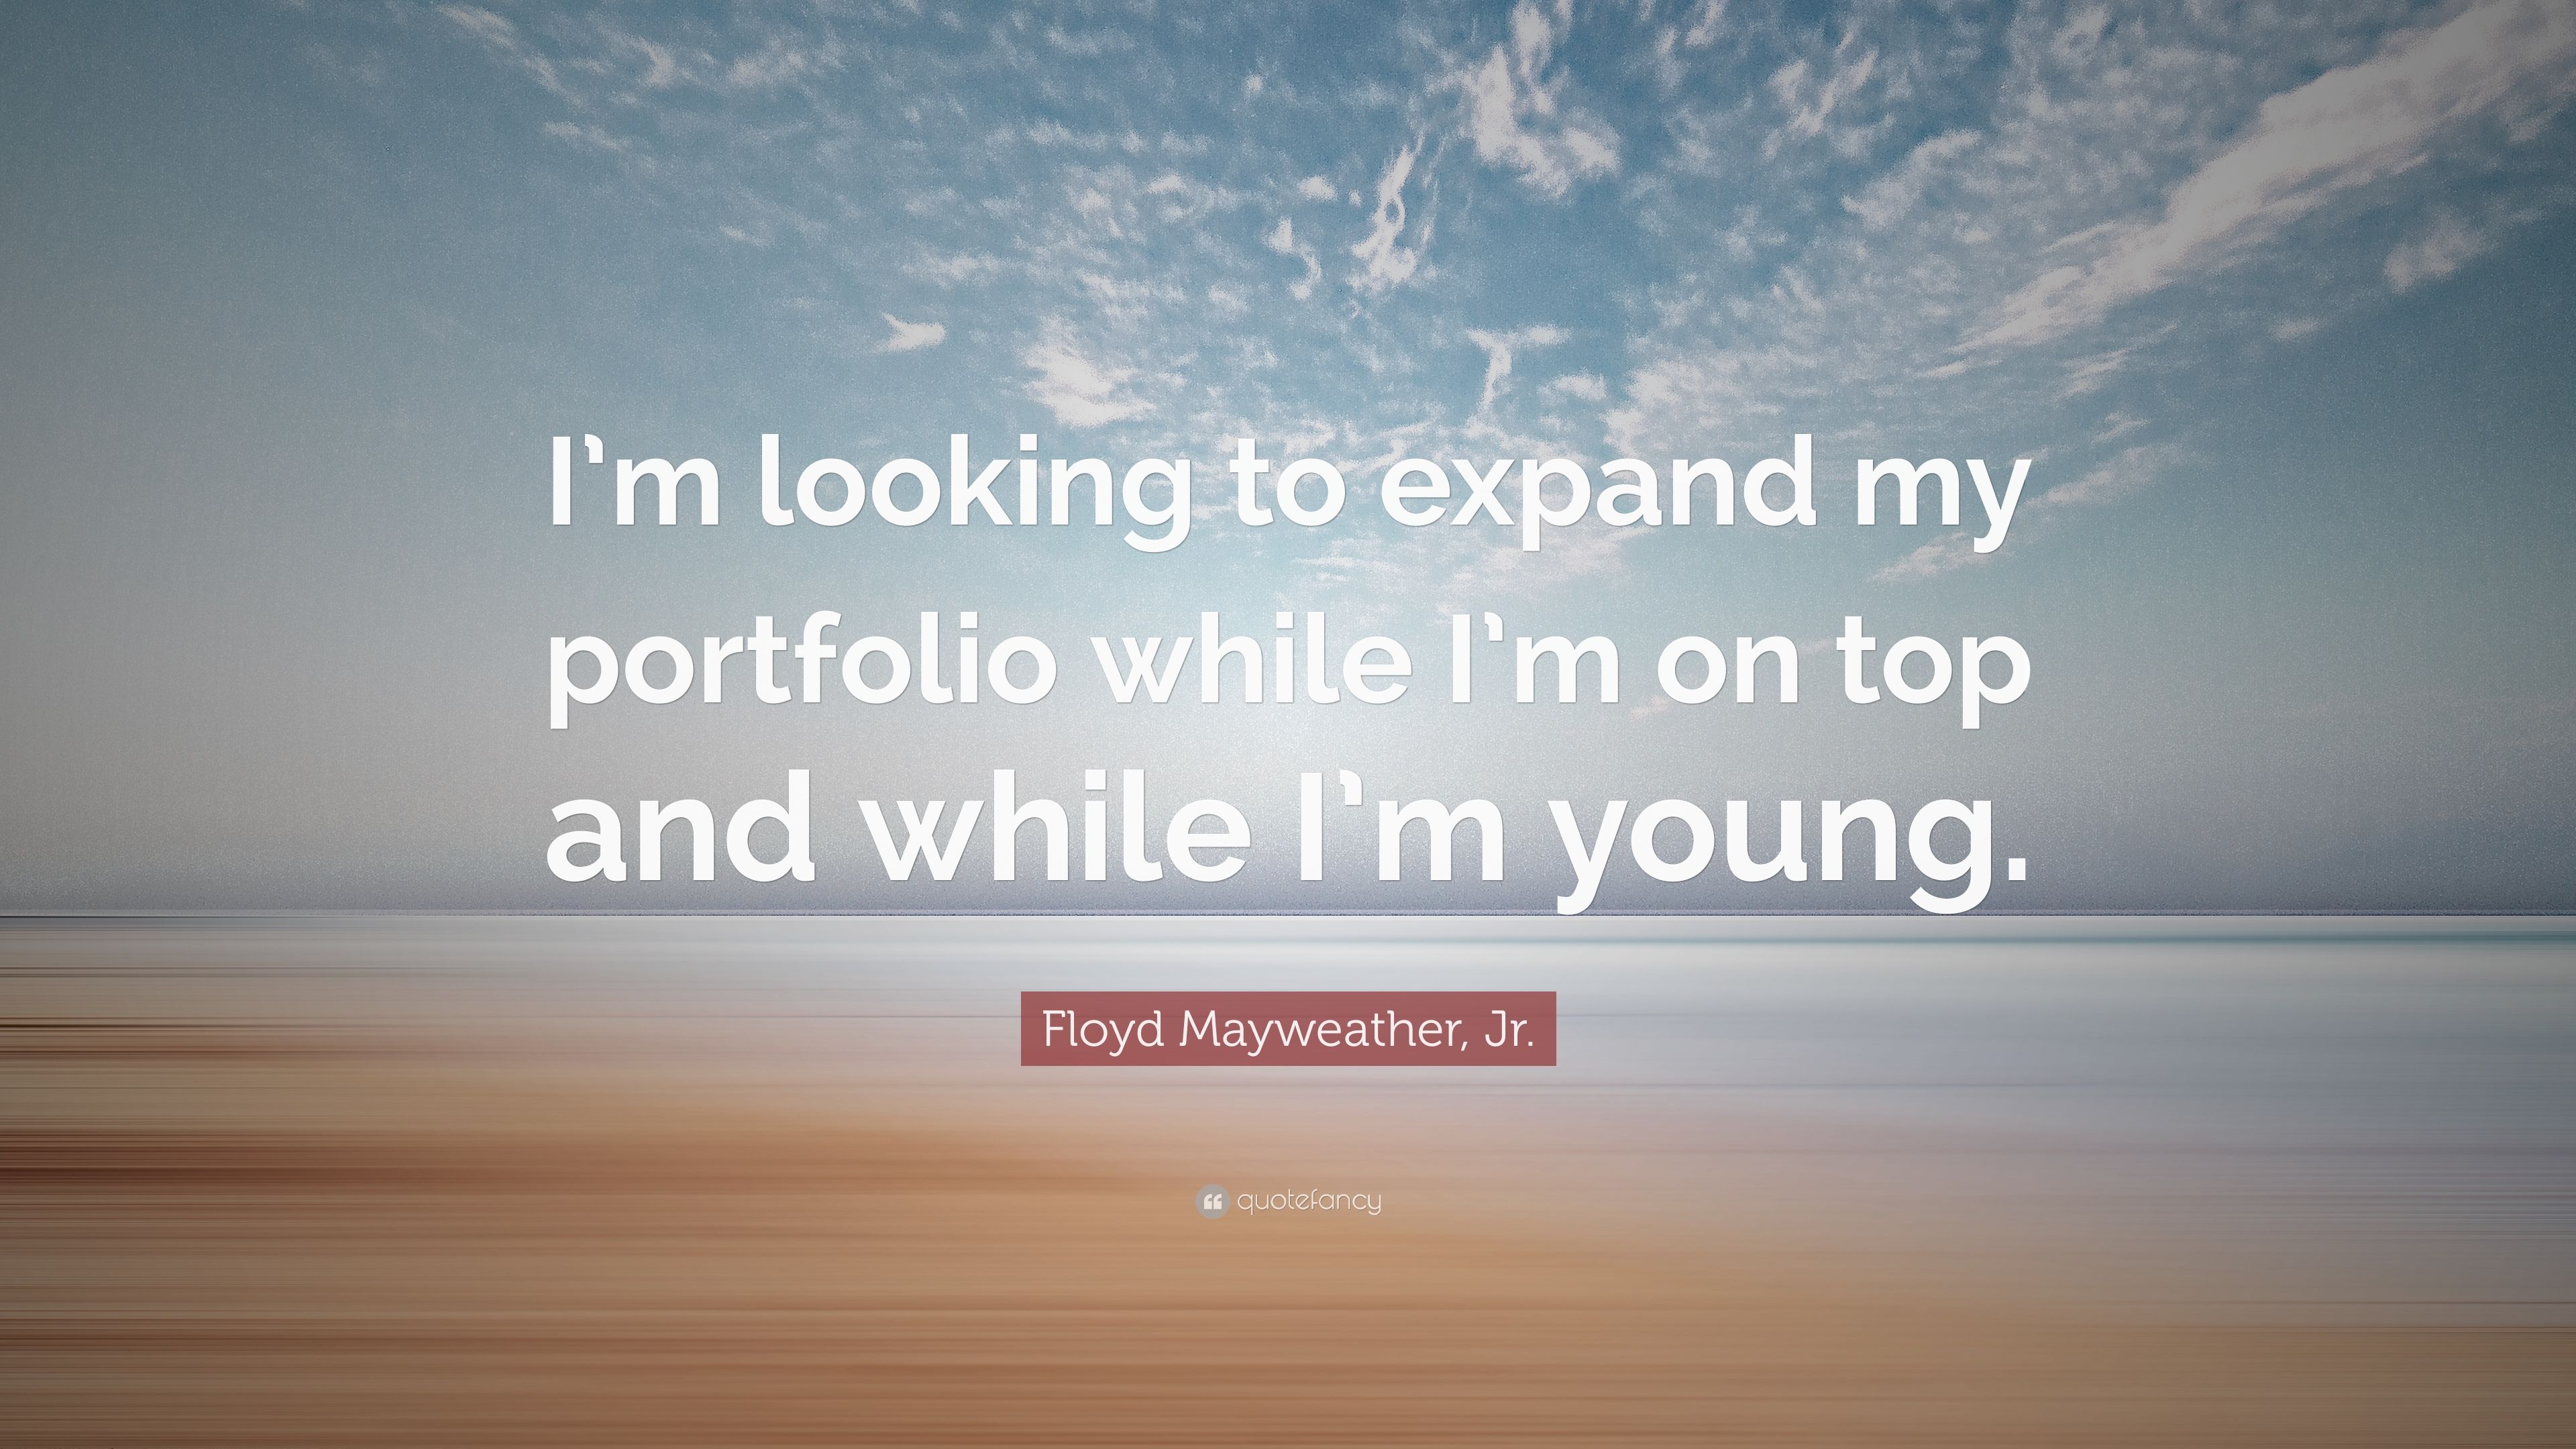 Floyd Mayweather, Jr. Quote: “I'm looking to expand my portfolio while I'm on top and while I'm young.” (10 wallpaper)